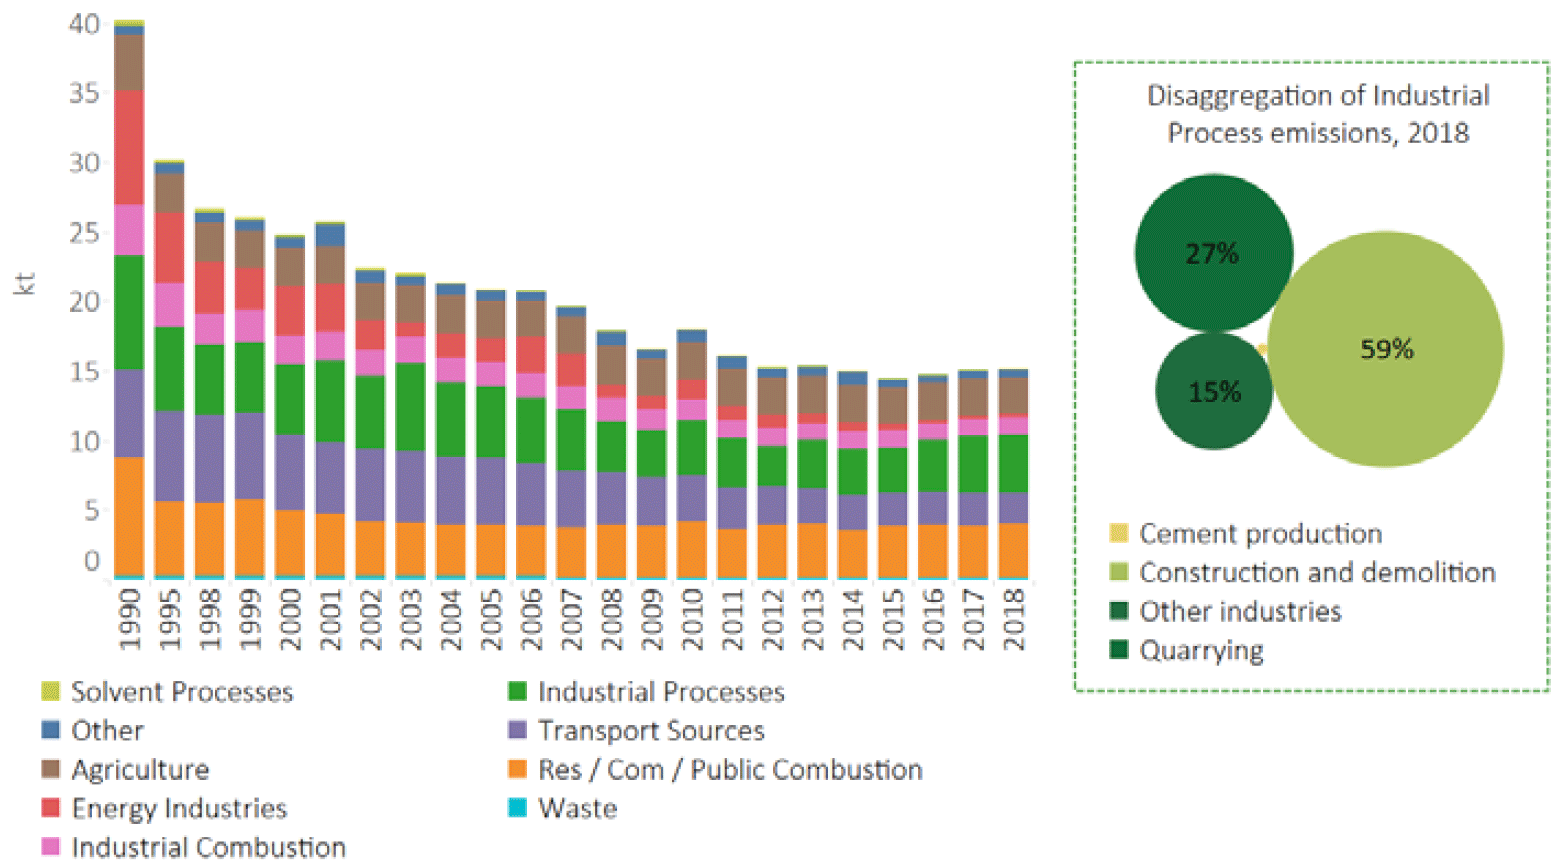 Unlike most other pollutants, the emissions profile of PM10 is diverse: transport sources, residential and industrial processes each accounted for over 15% of total emissions in 2018. Emissions from energy industries and transport sources have had the most notable impact on the trend.